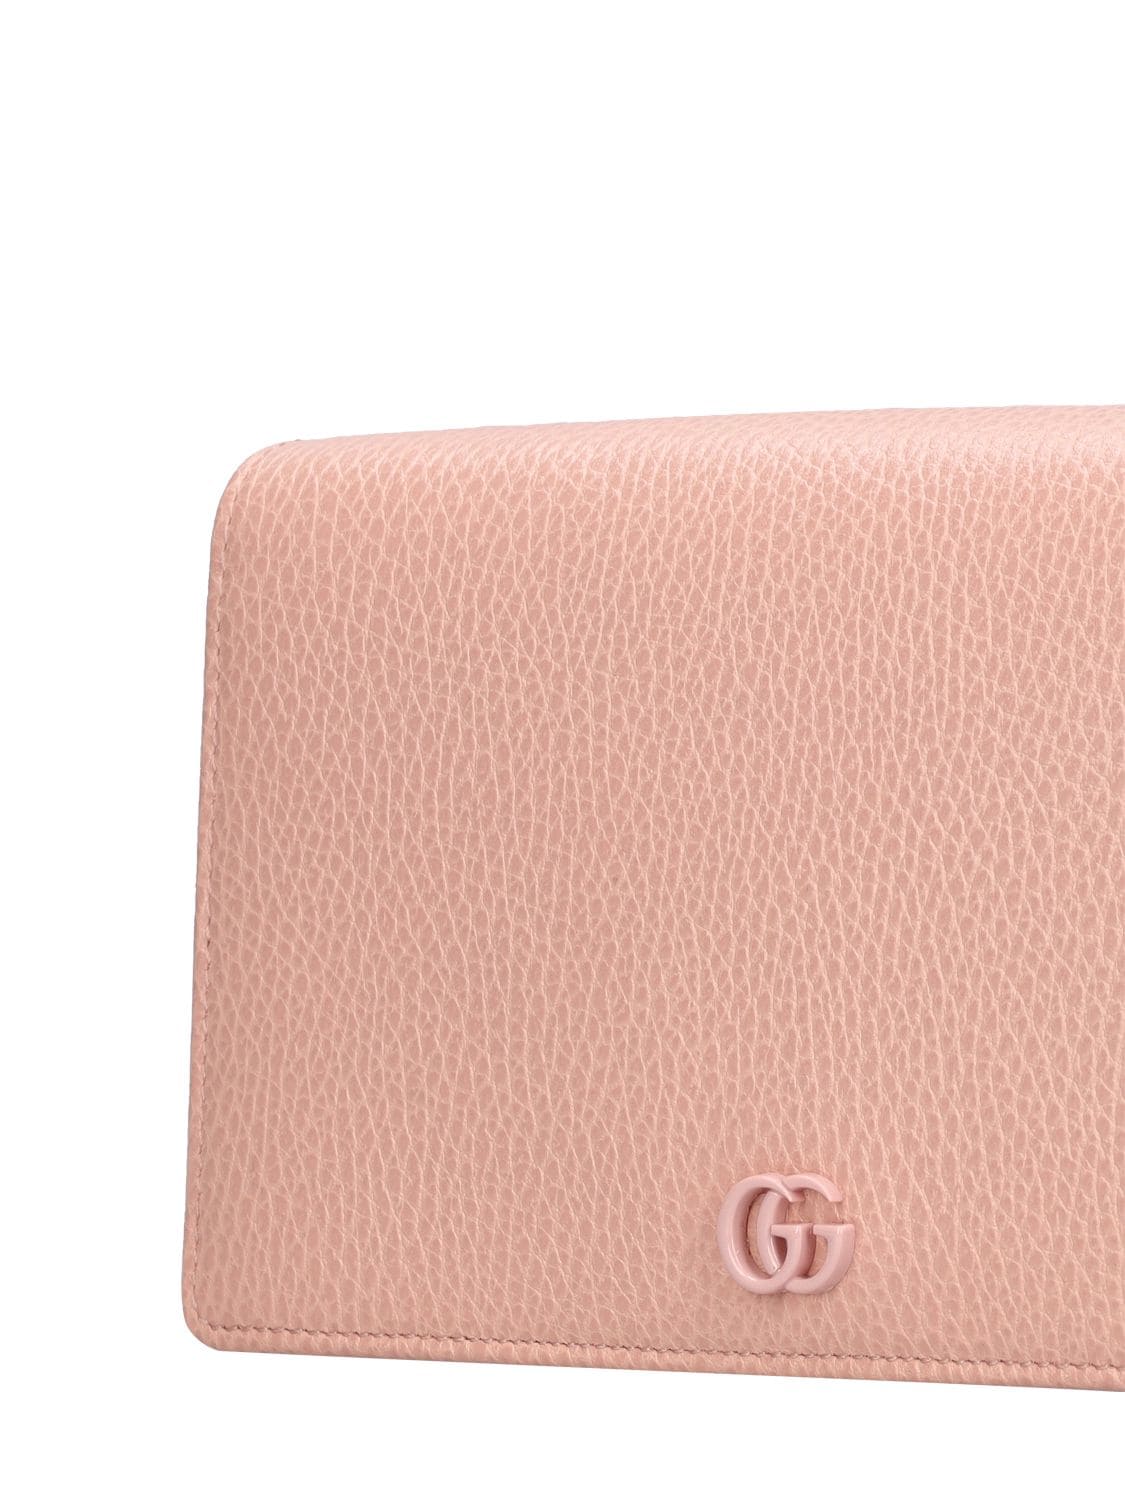 Gucci Cosmogonie Marmont Leather Makeup Bag in Pink